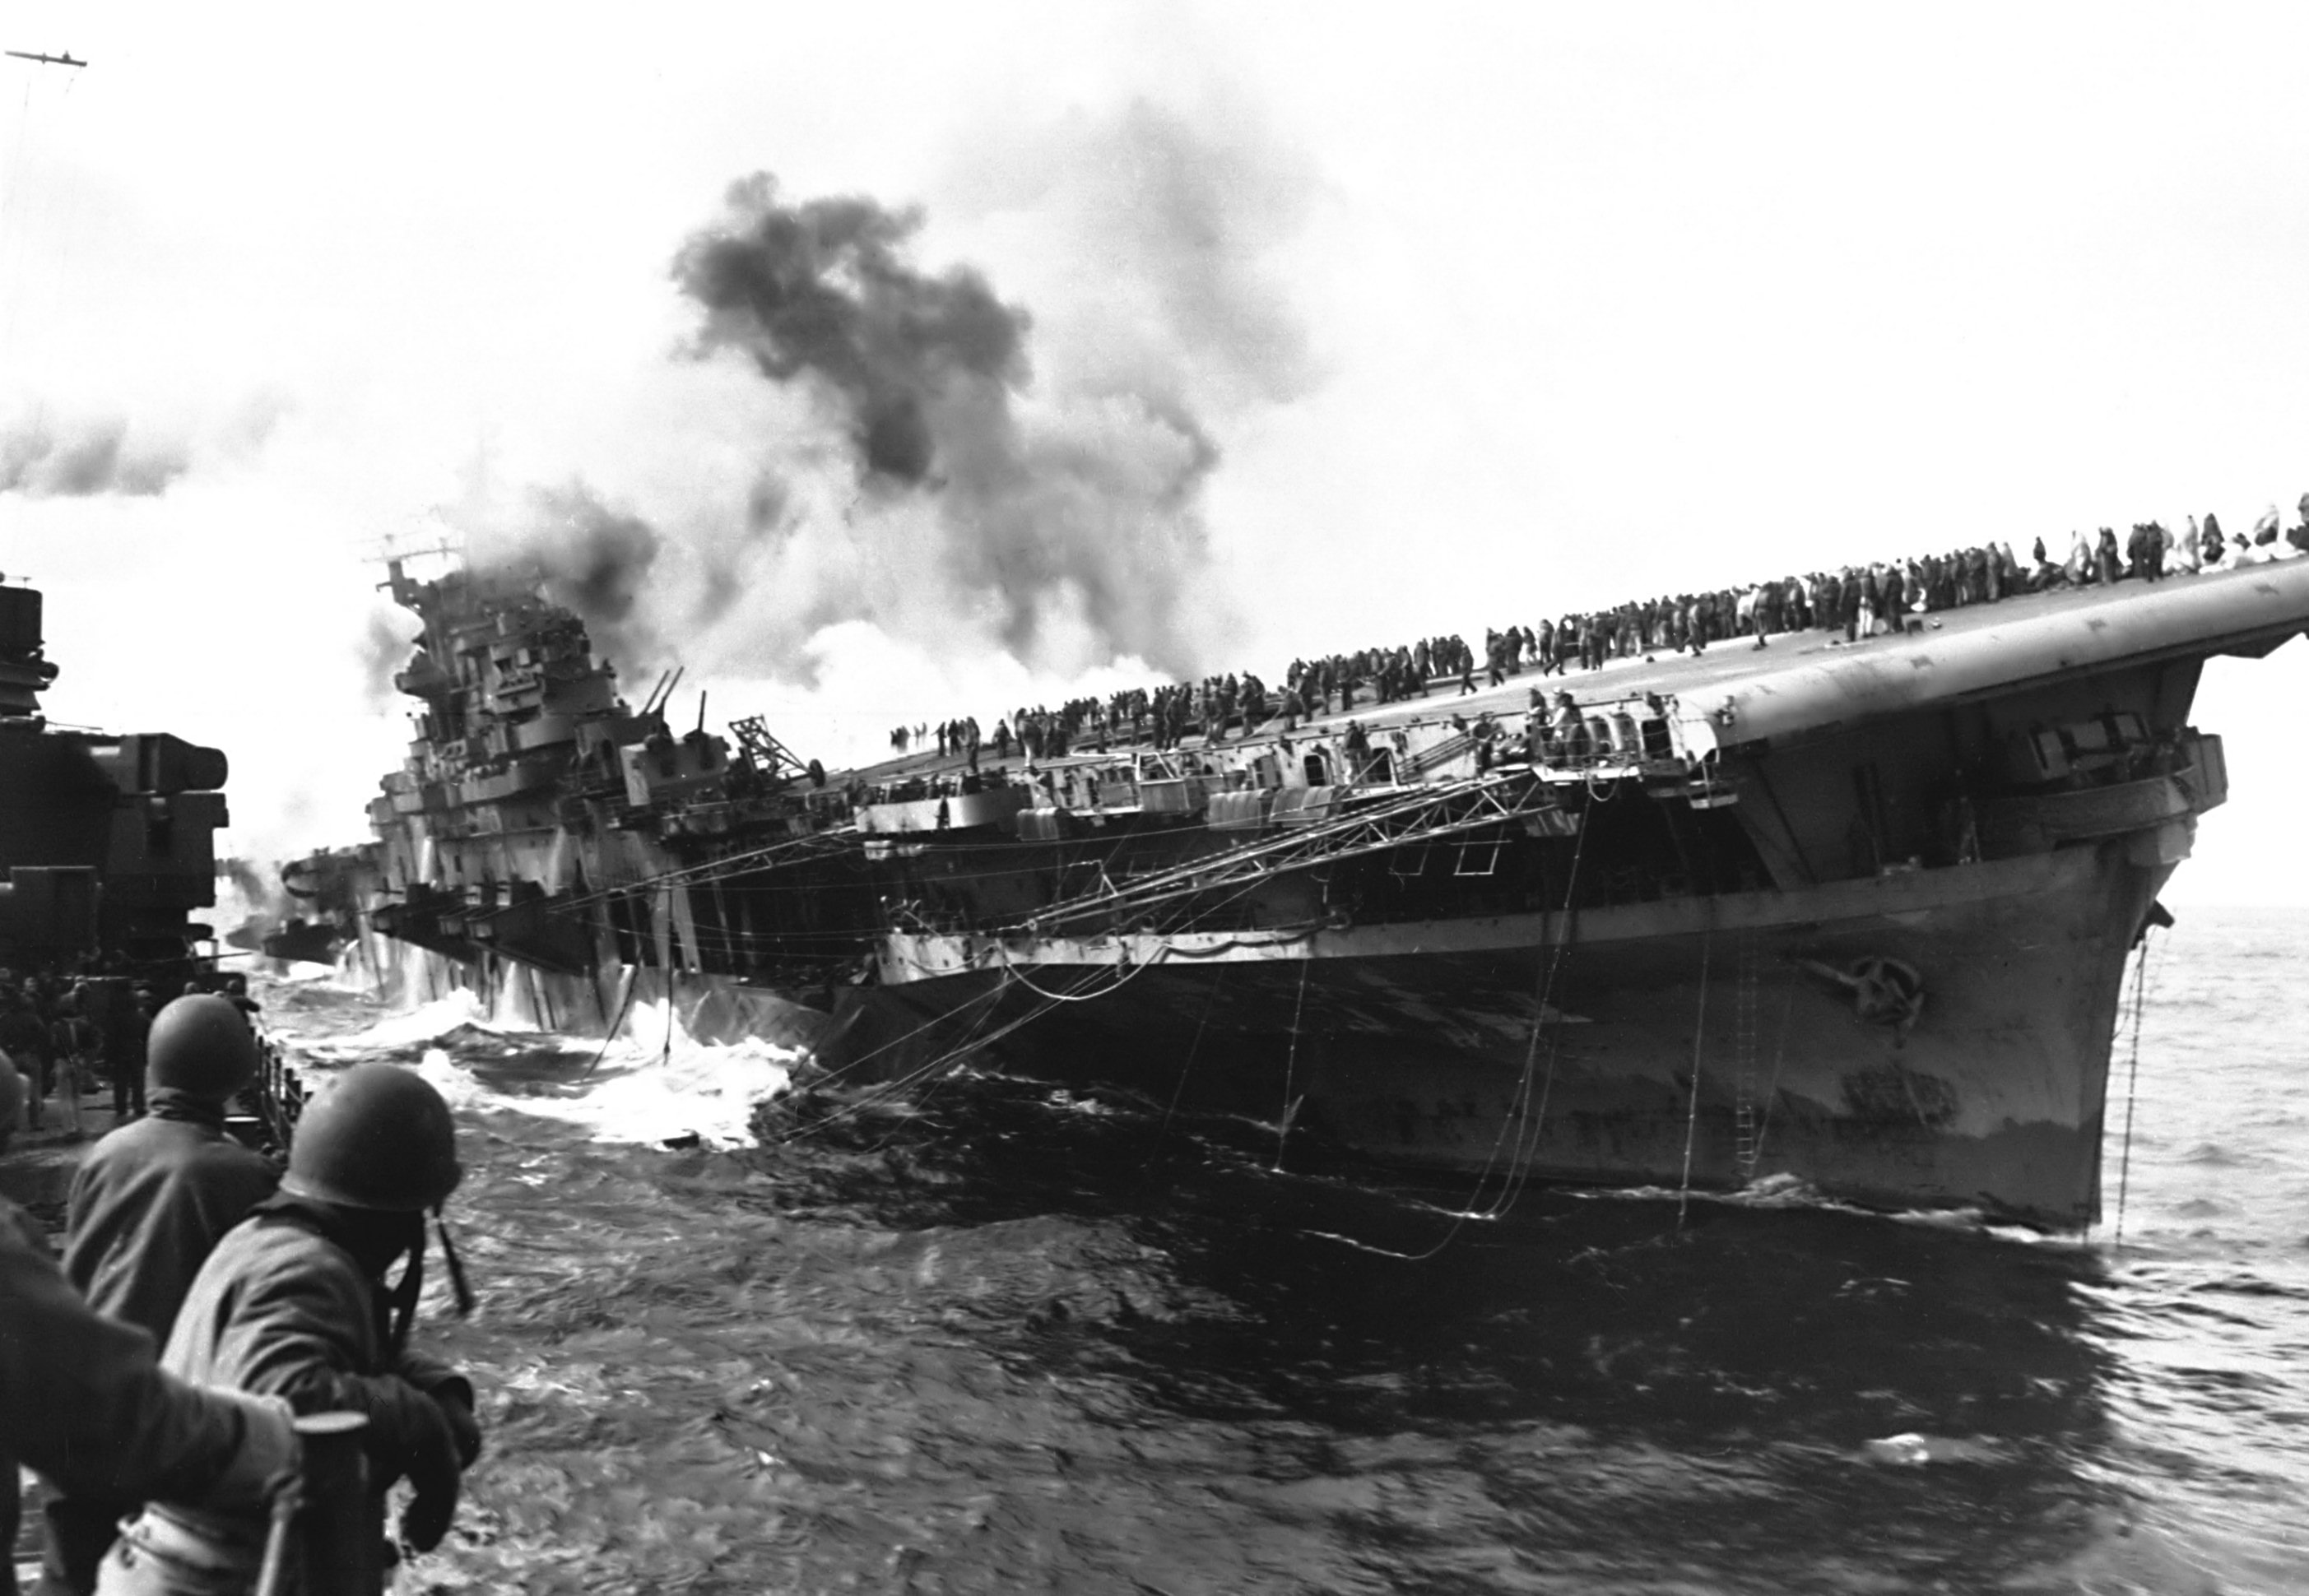 Franklin listing and afire after being hit by two bombs, off Japan, 19 Mar 1945; photograph taken from cruiser Santa Fe